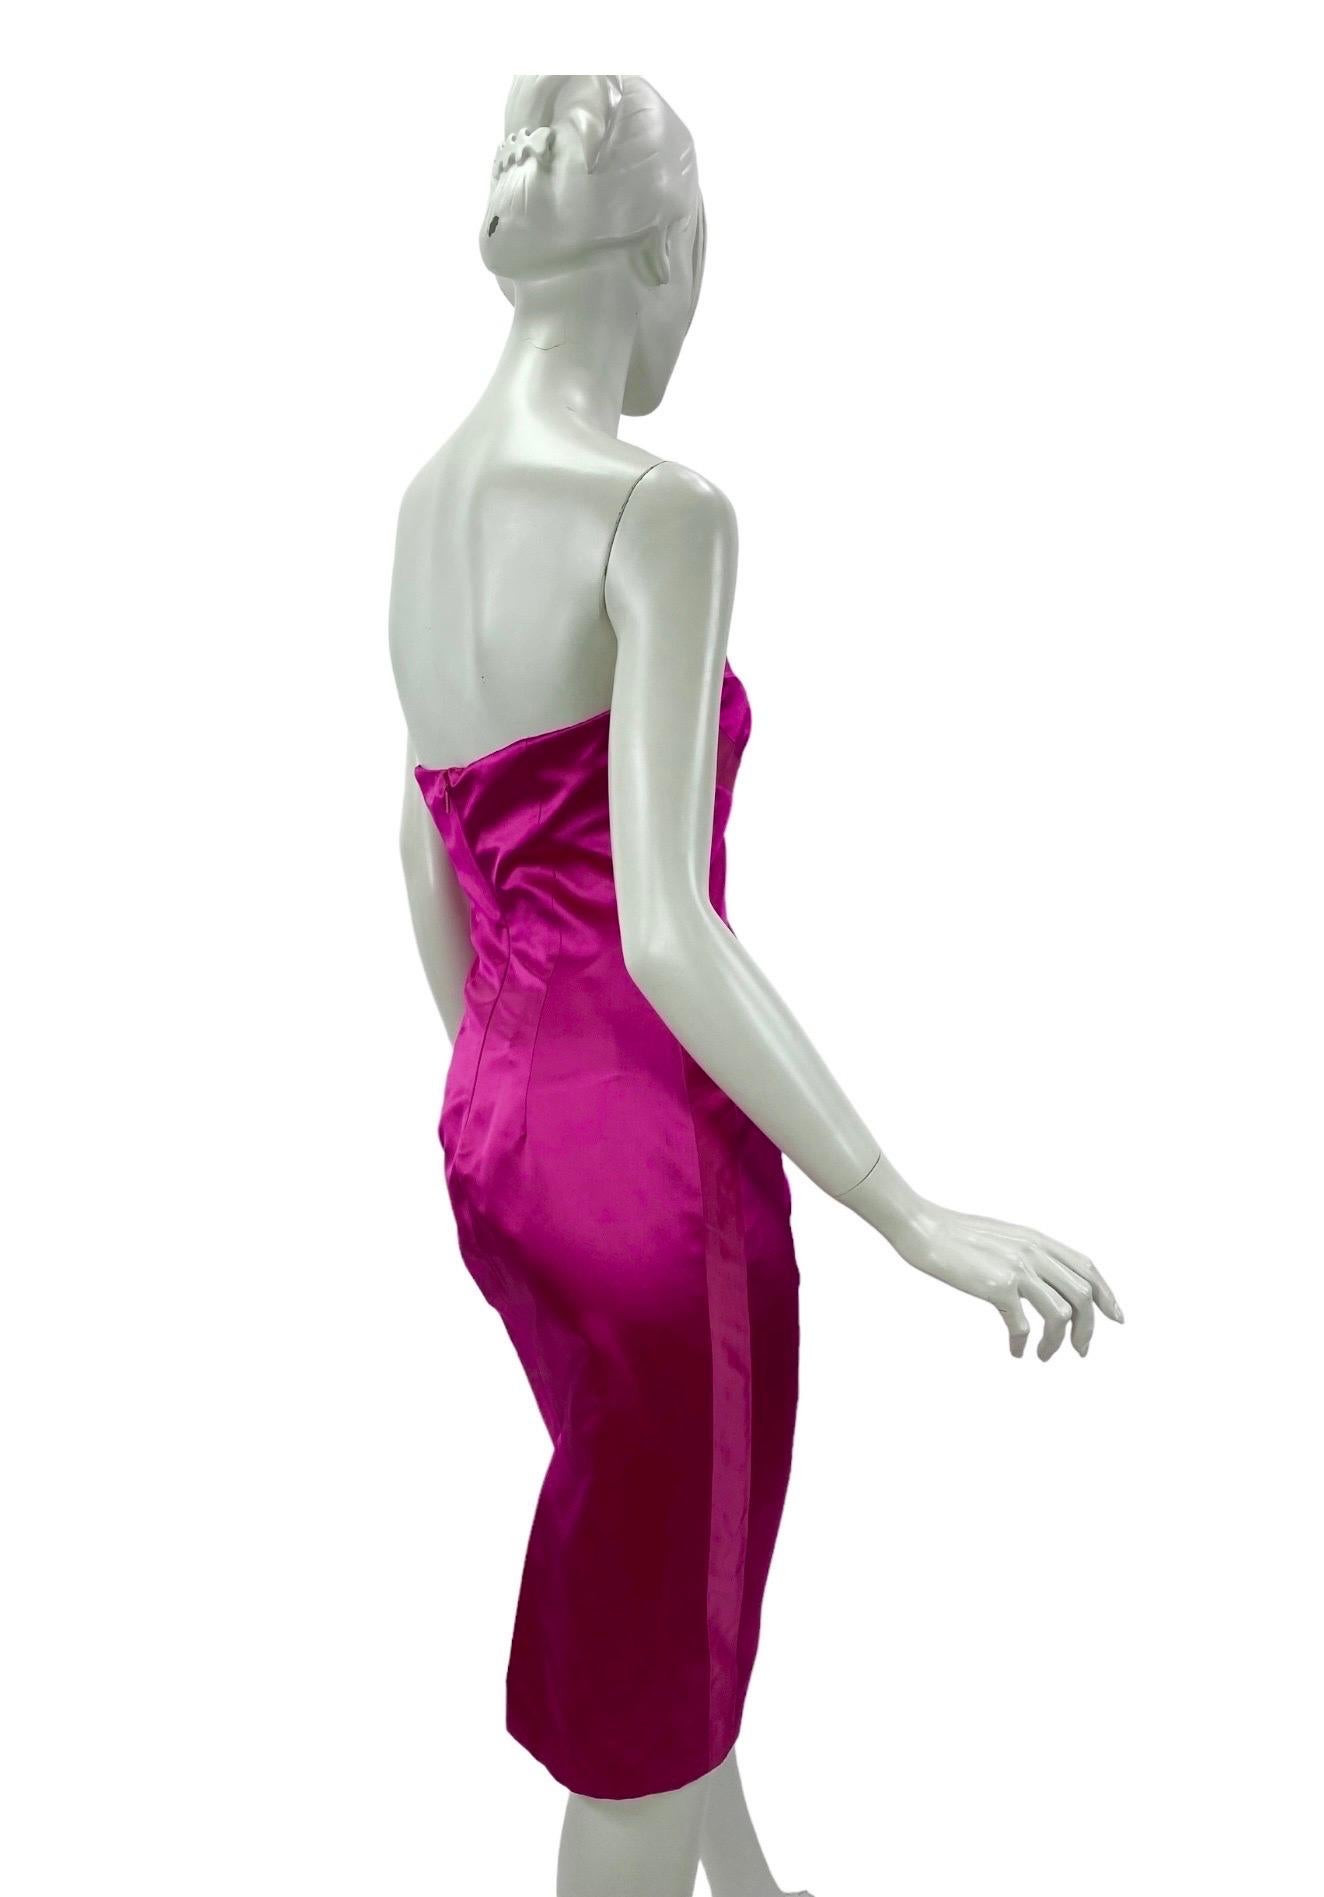 S/S 2001 Vintage Tom Ford for Gucci Hot Pink Strapless Dress In Excellent Condition For Sale In Montgomery, TX